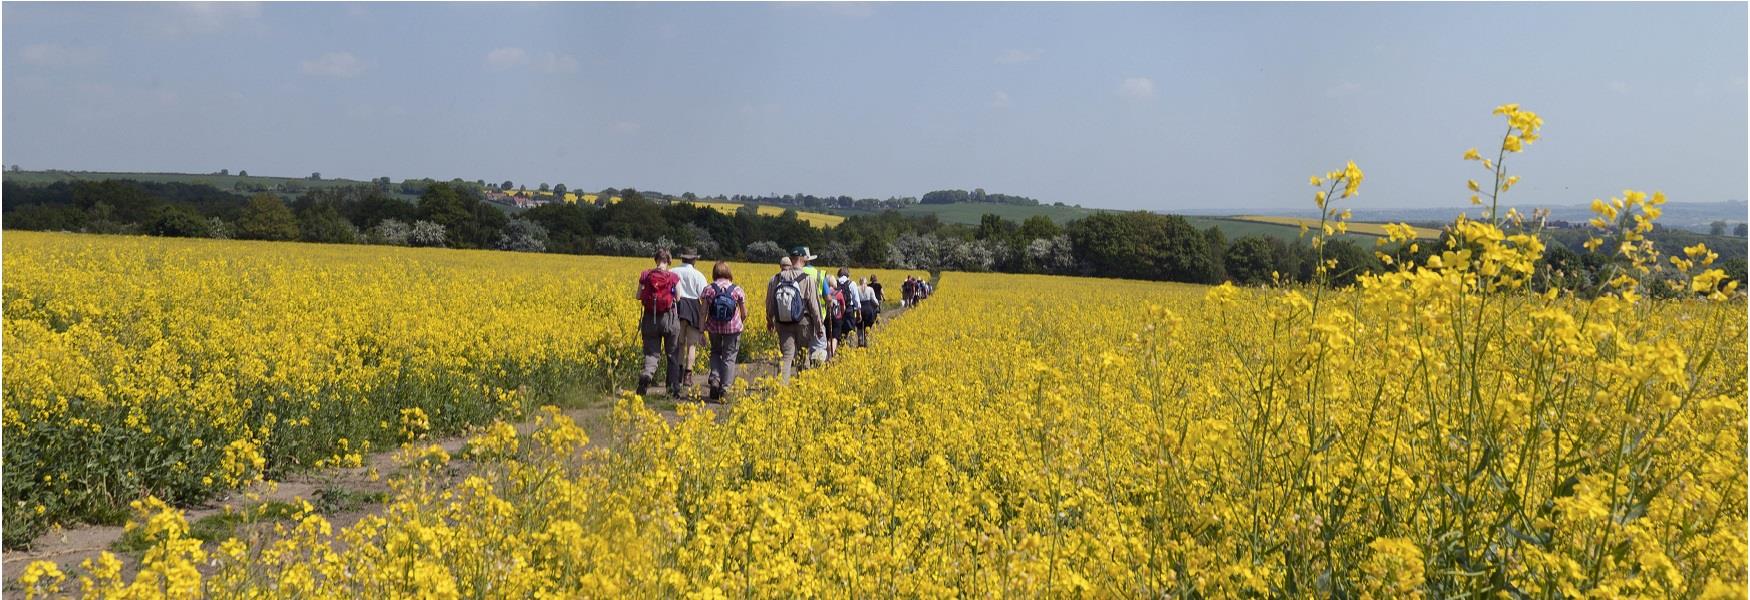 Walkers passing through a field of Oilseed Rape